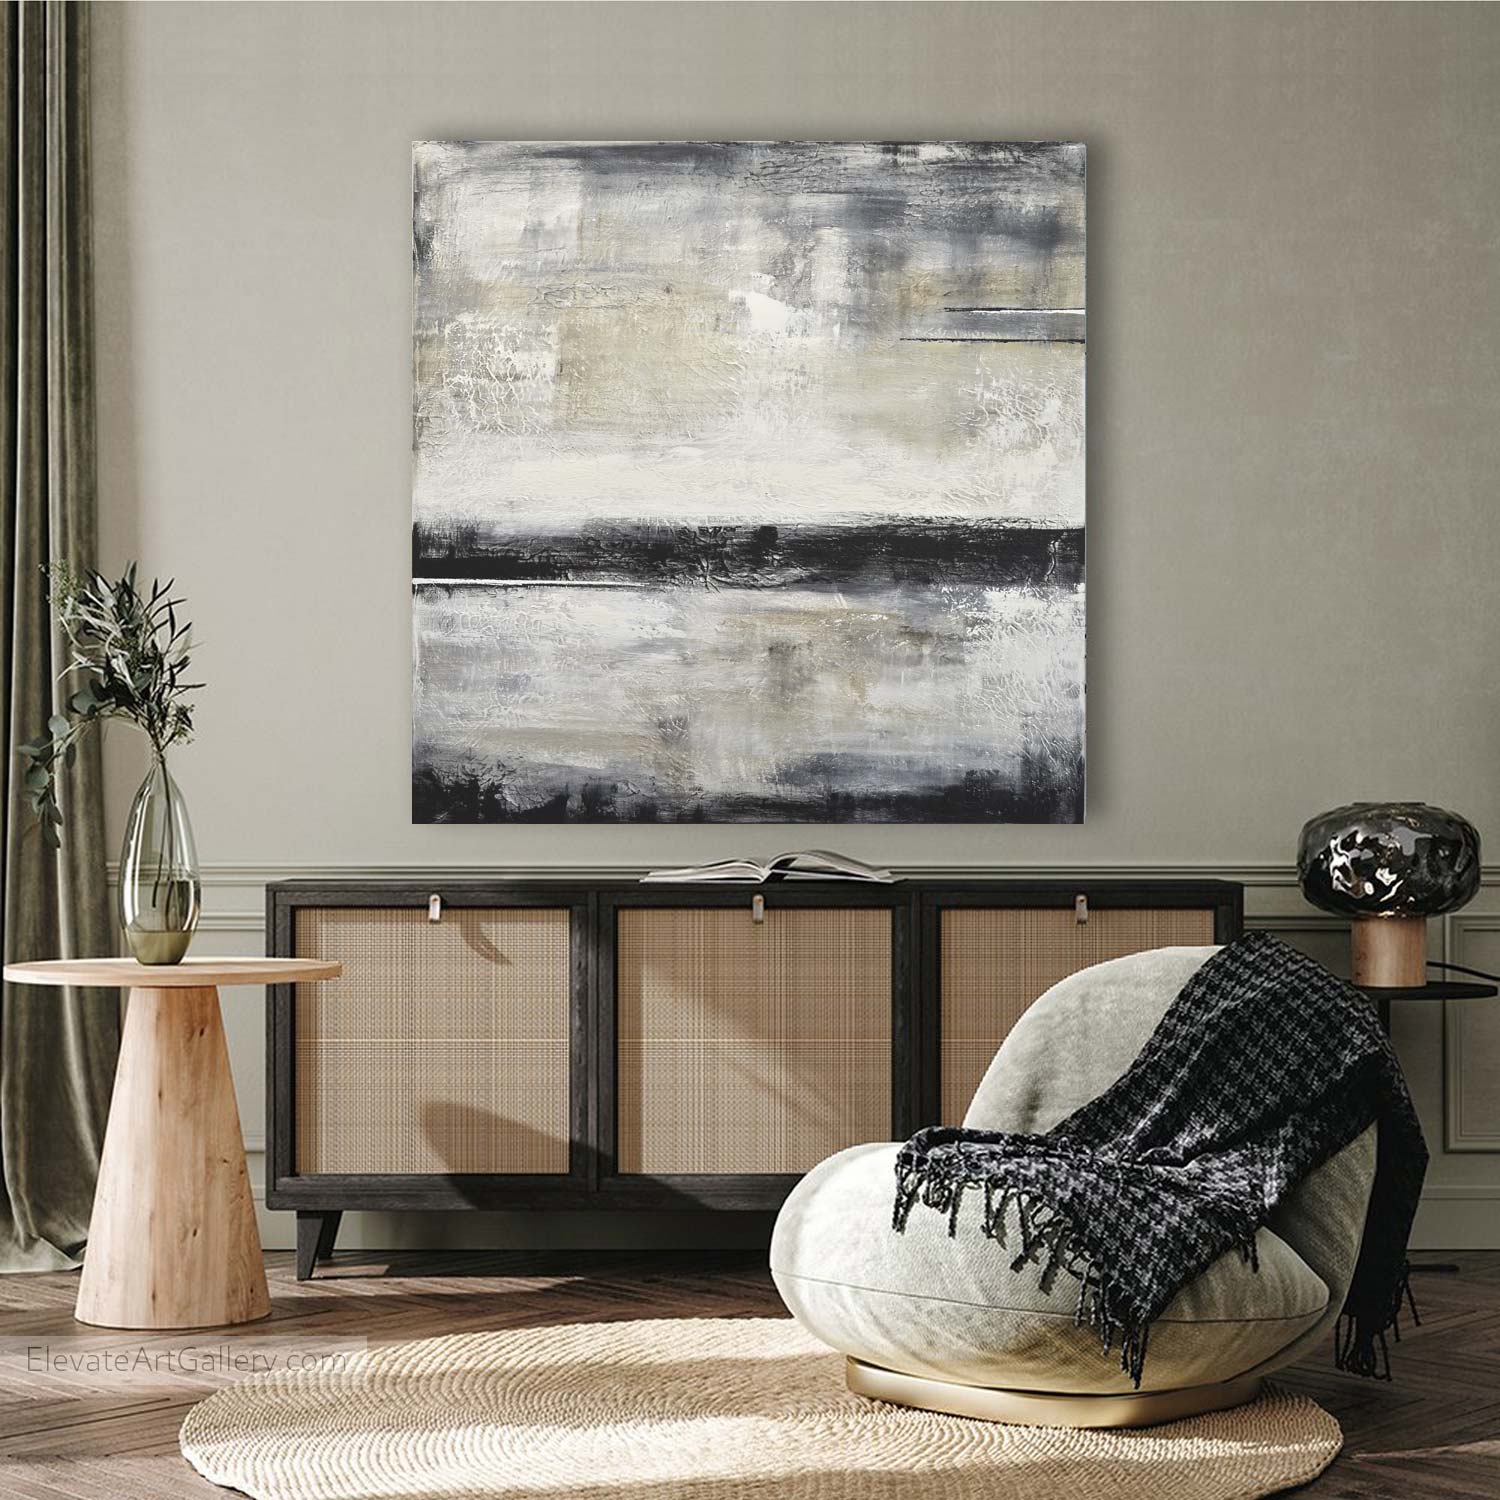 Large Square Contemporary Painting "Daydream"